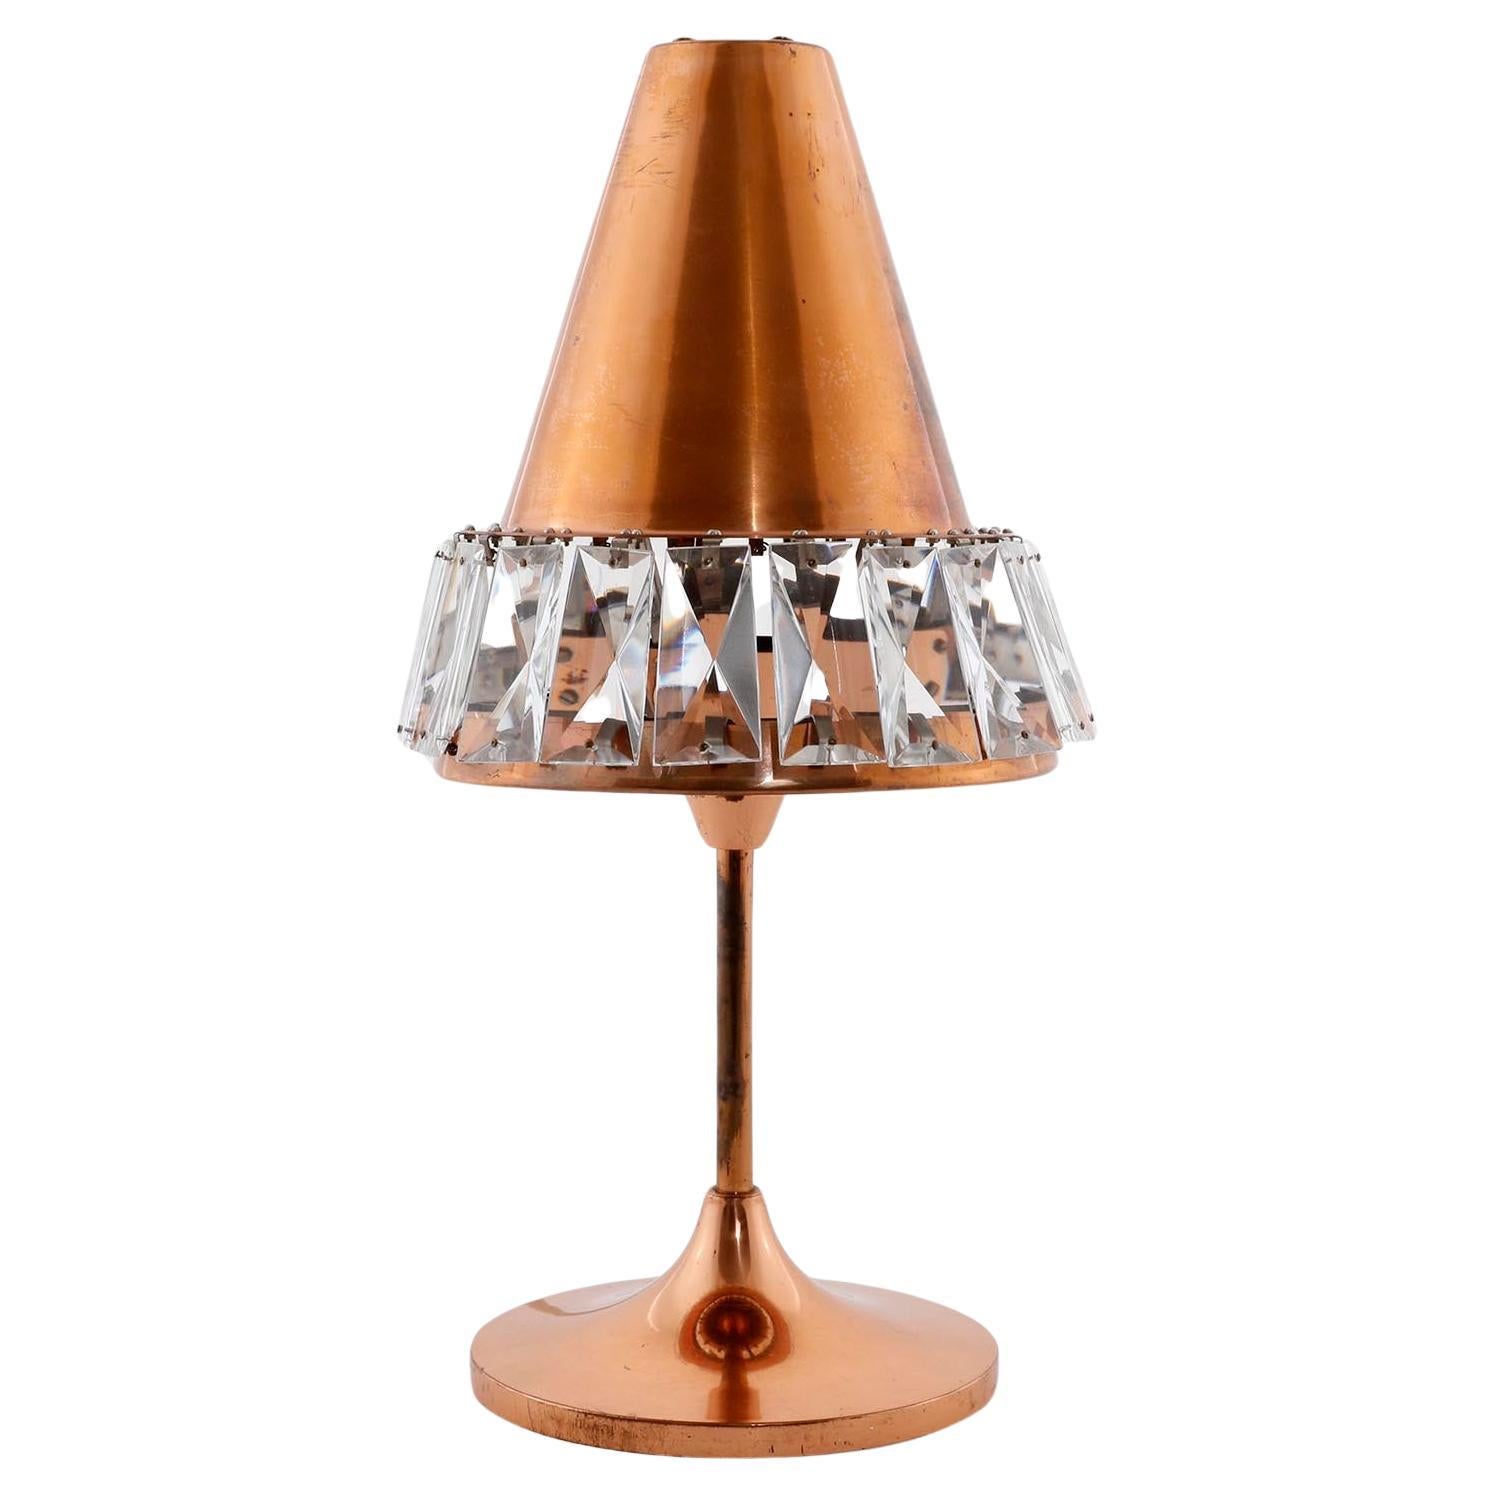 Bakalowits Table Lamp, Patinated Copper Nickel Crystal Glass, Austria, 1960s For Sale